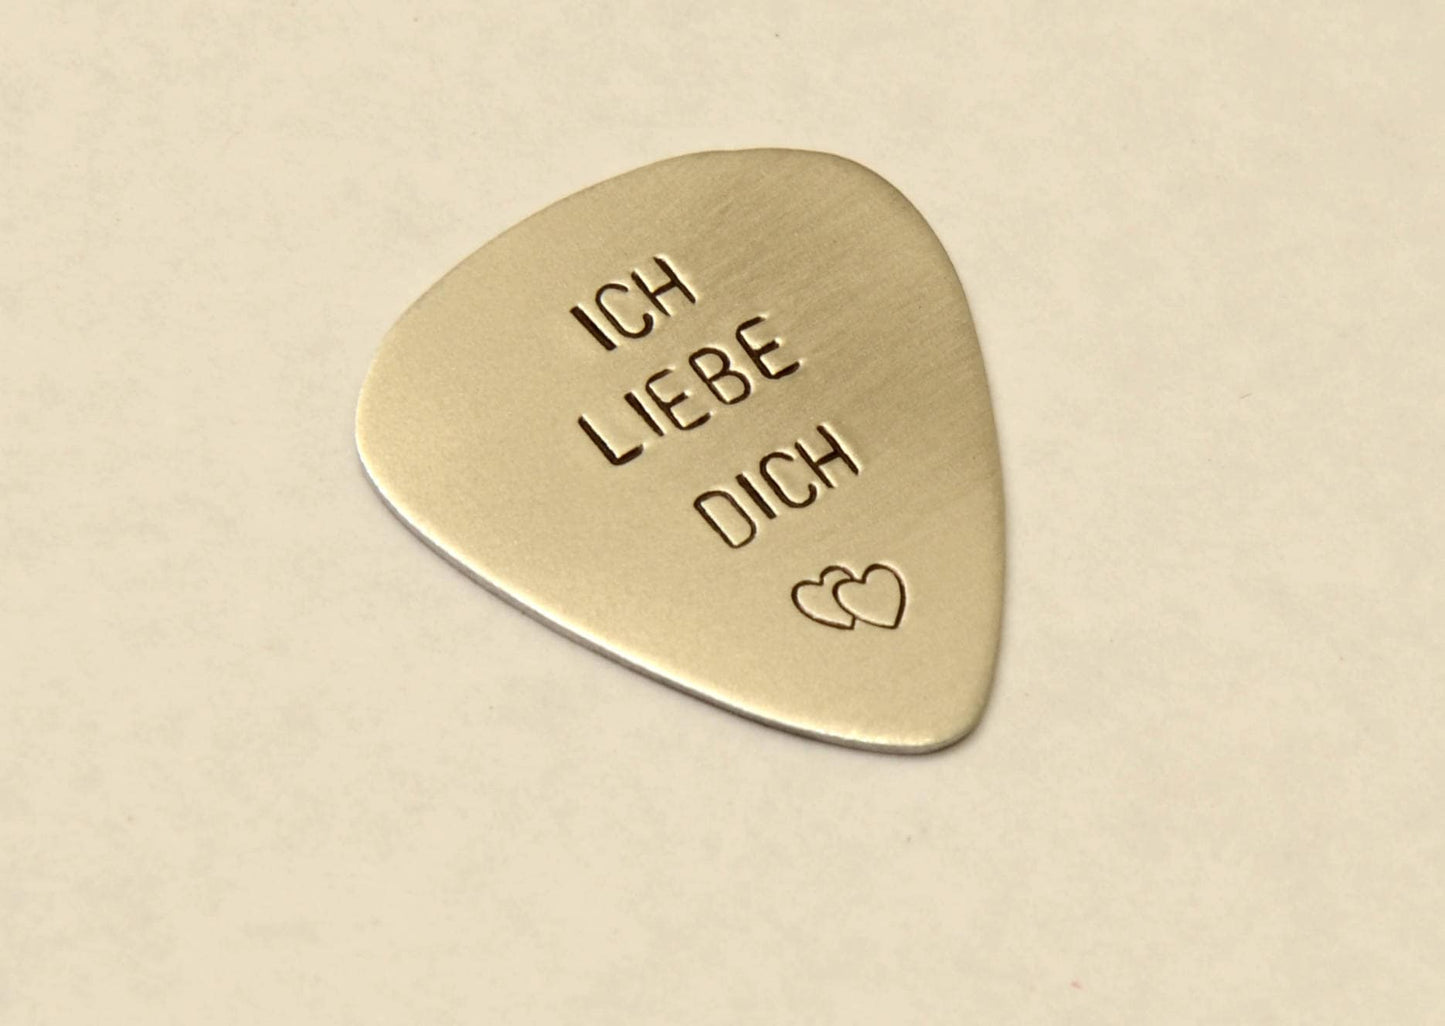 Sterling Silver Guitar Pick Ich Liebe Dich - I Love You in German